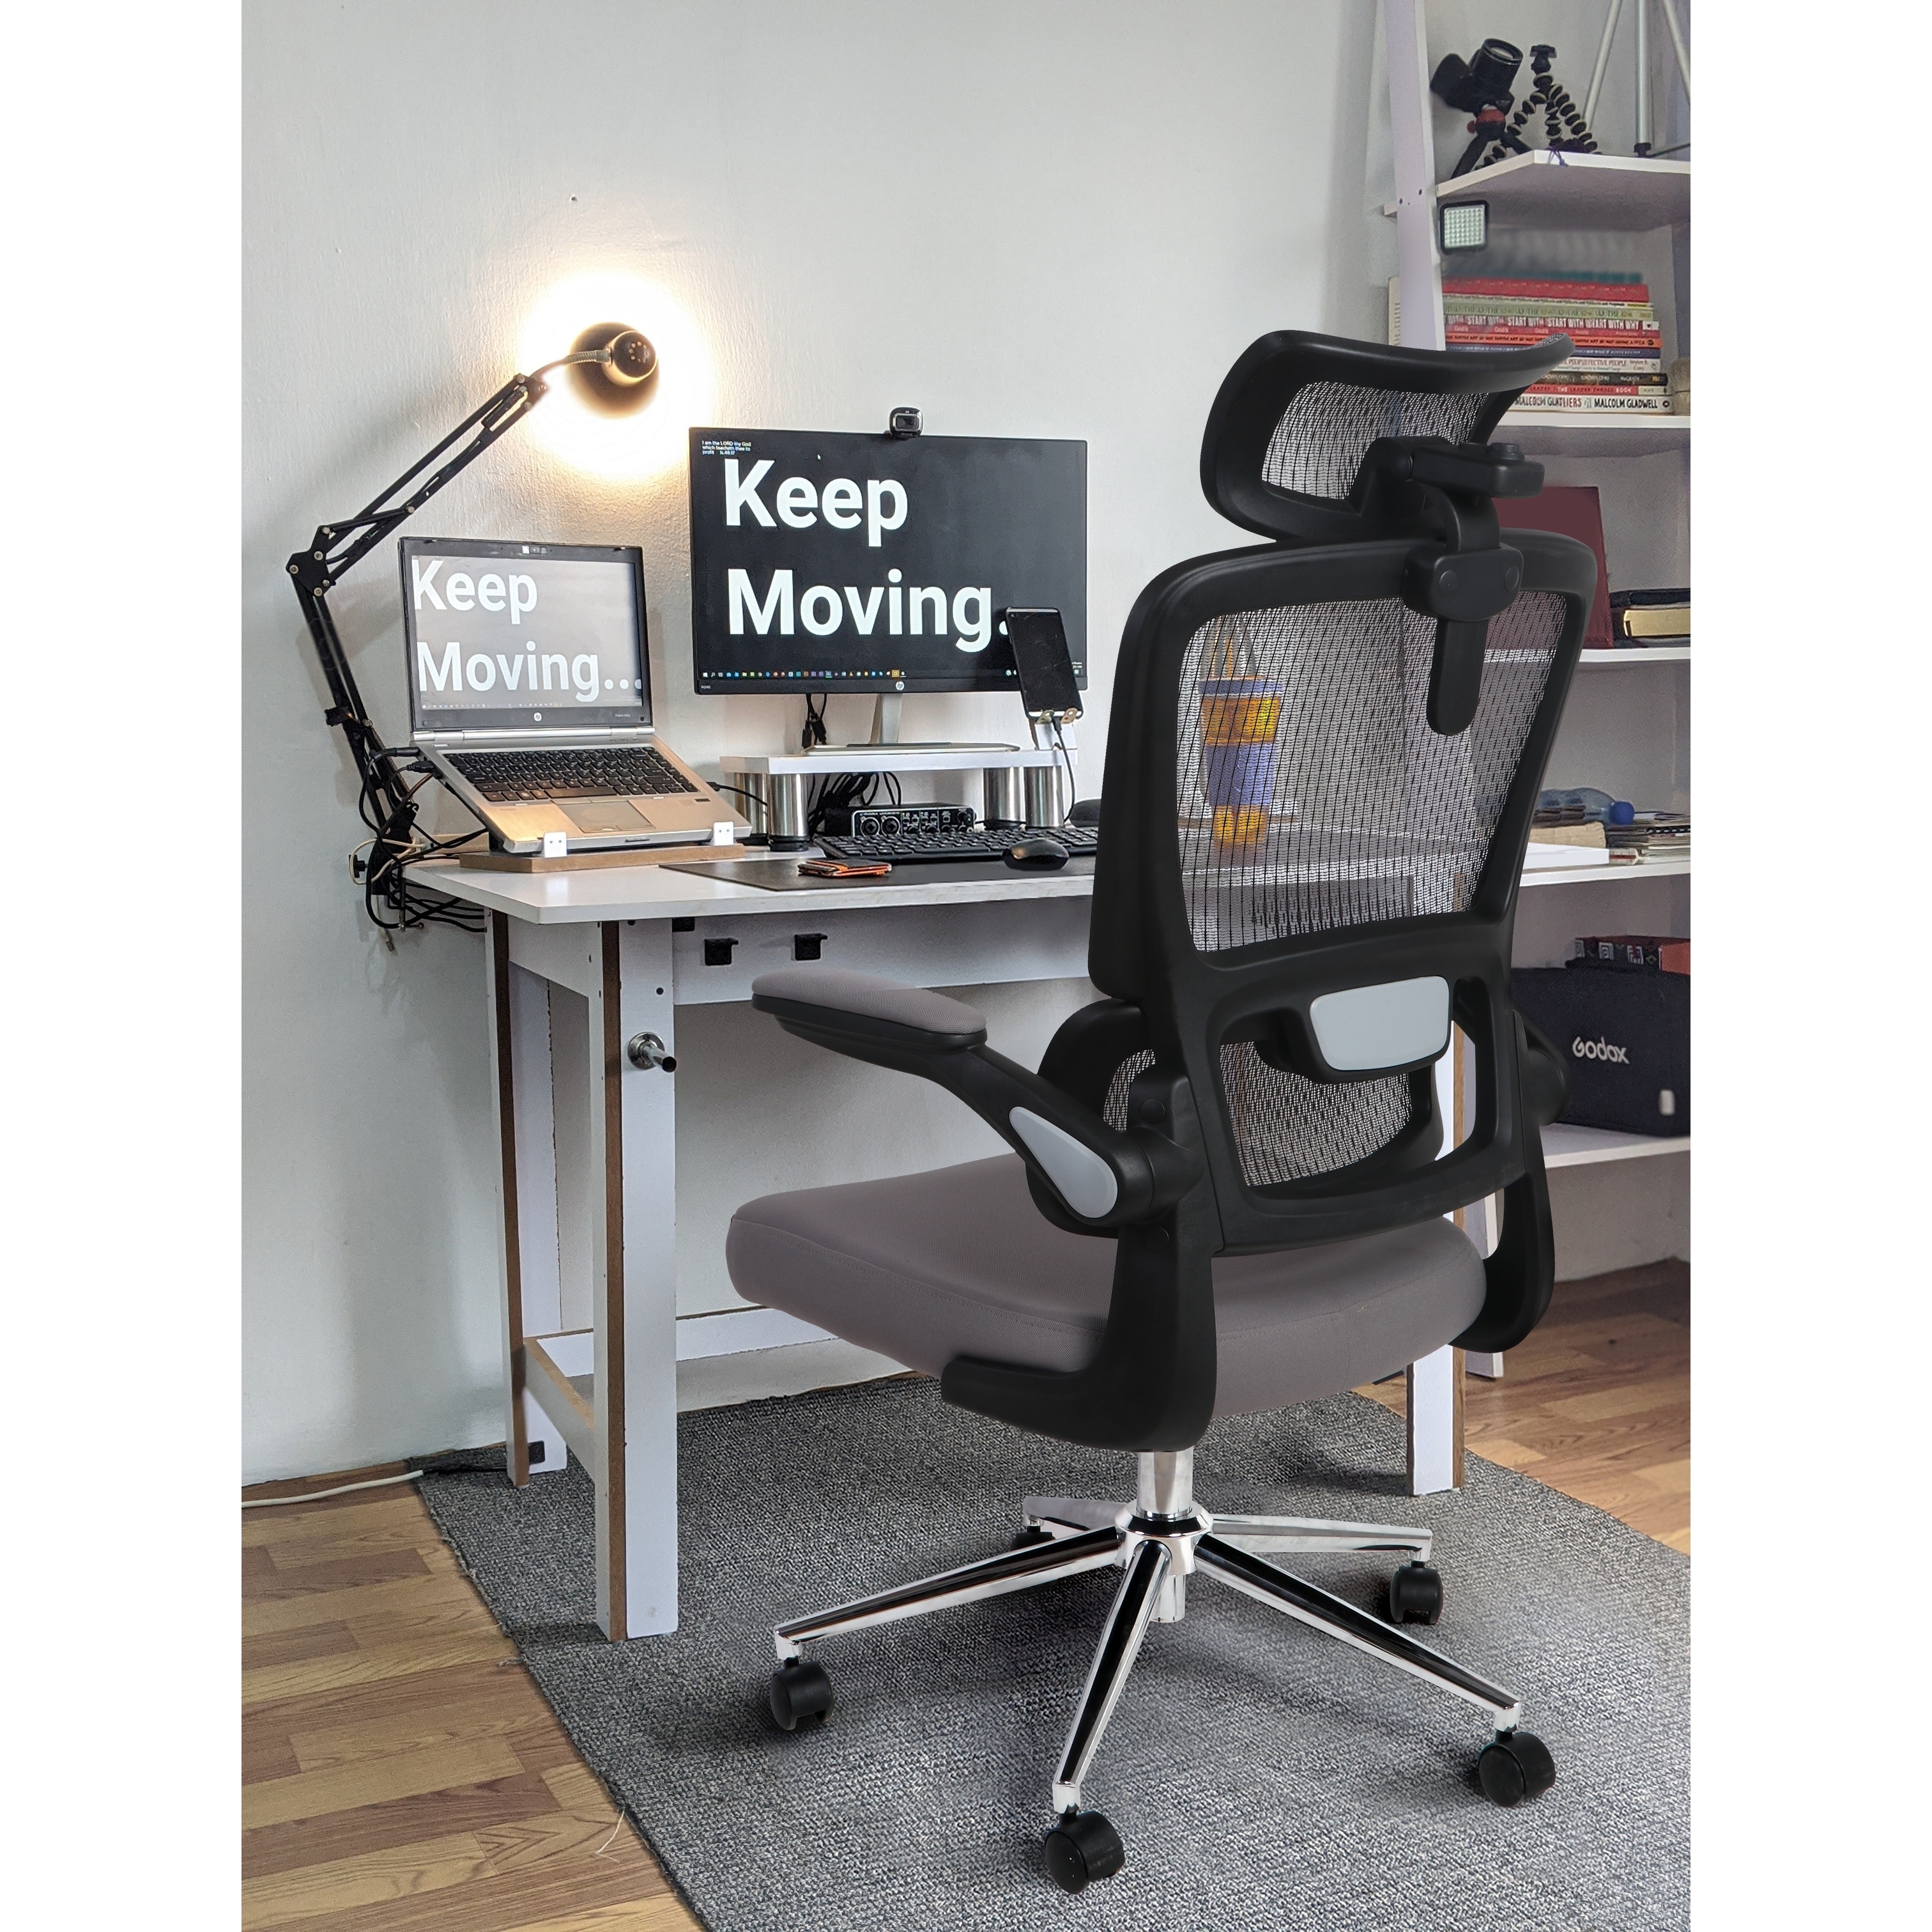 https://ak1.ostkcdn.com/images/products/is/images/direct/ca1ad70ead09416aab845d14b9c65b0967734e5c/Mesh-Ergonomic-Office-Chair-with-Flip-Up-Arms-High-Back-Desk-Chair.jpg